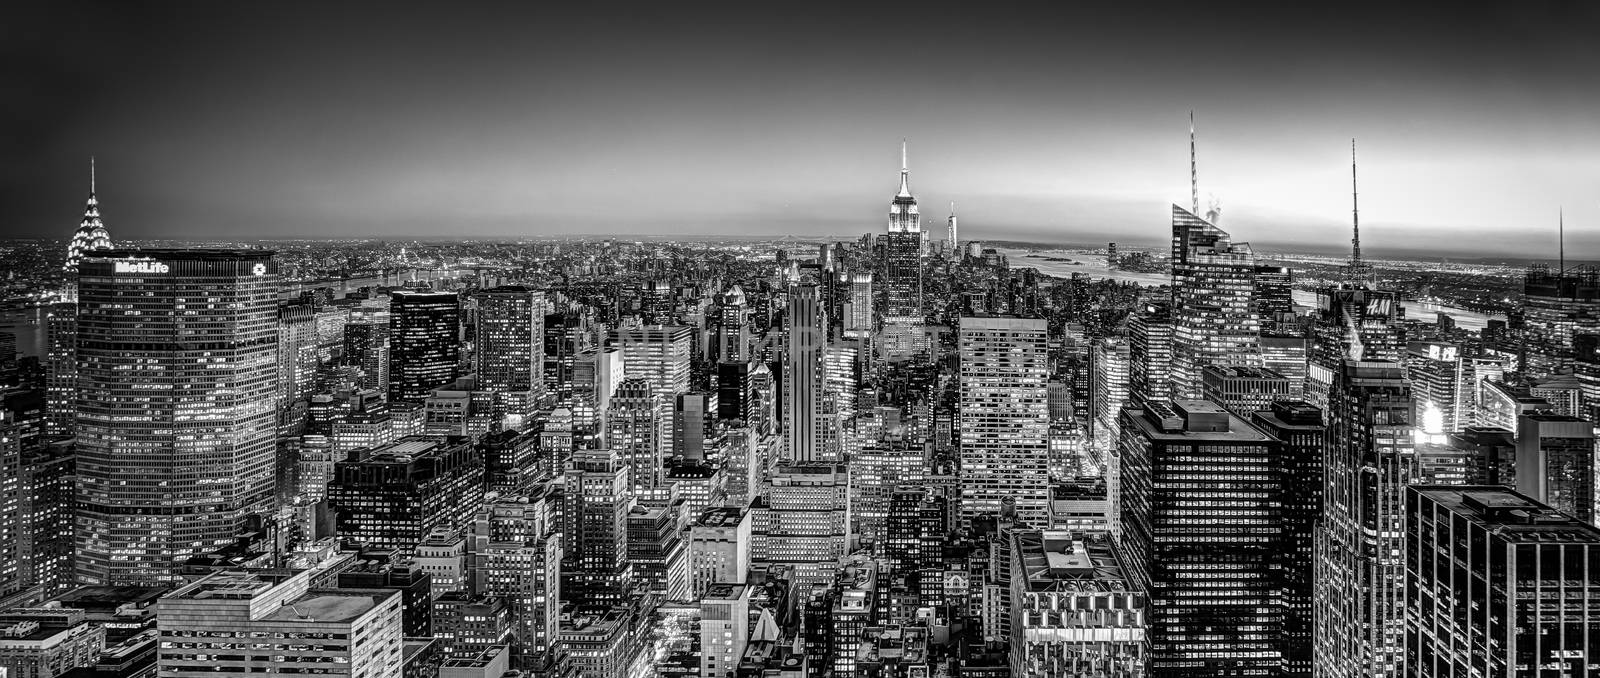 New York City. Manhattan downtown skyline with illuminated Empire State Building and skyscrapers at dusk. USA. Black and white image.